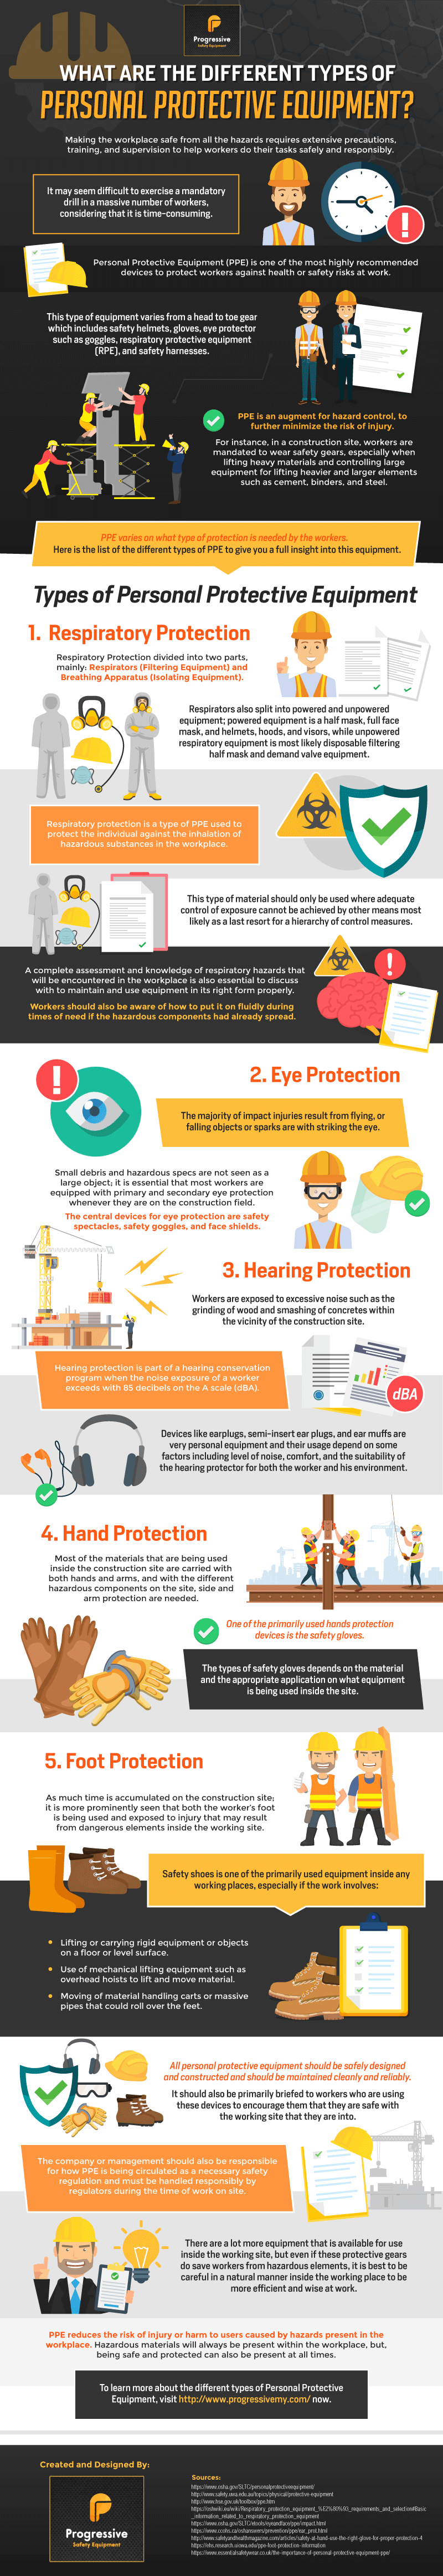 Types of Personal Protective Equipment